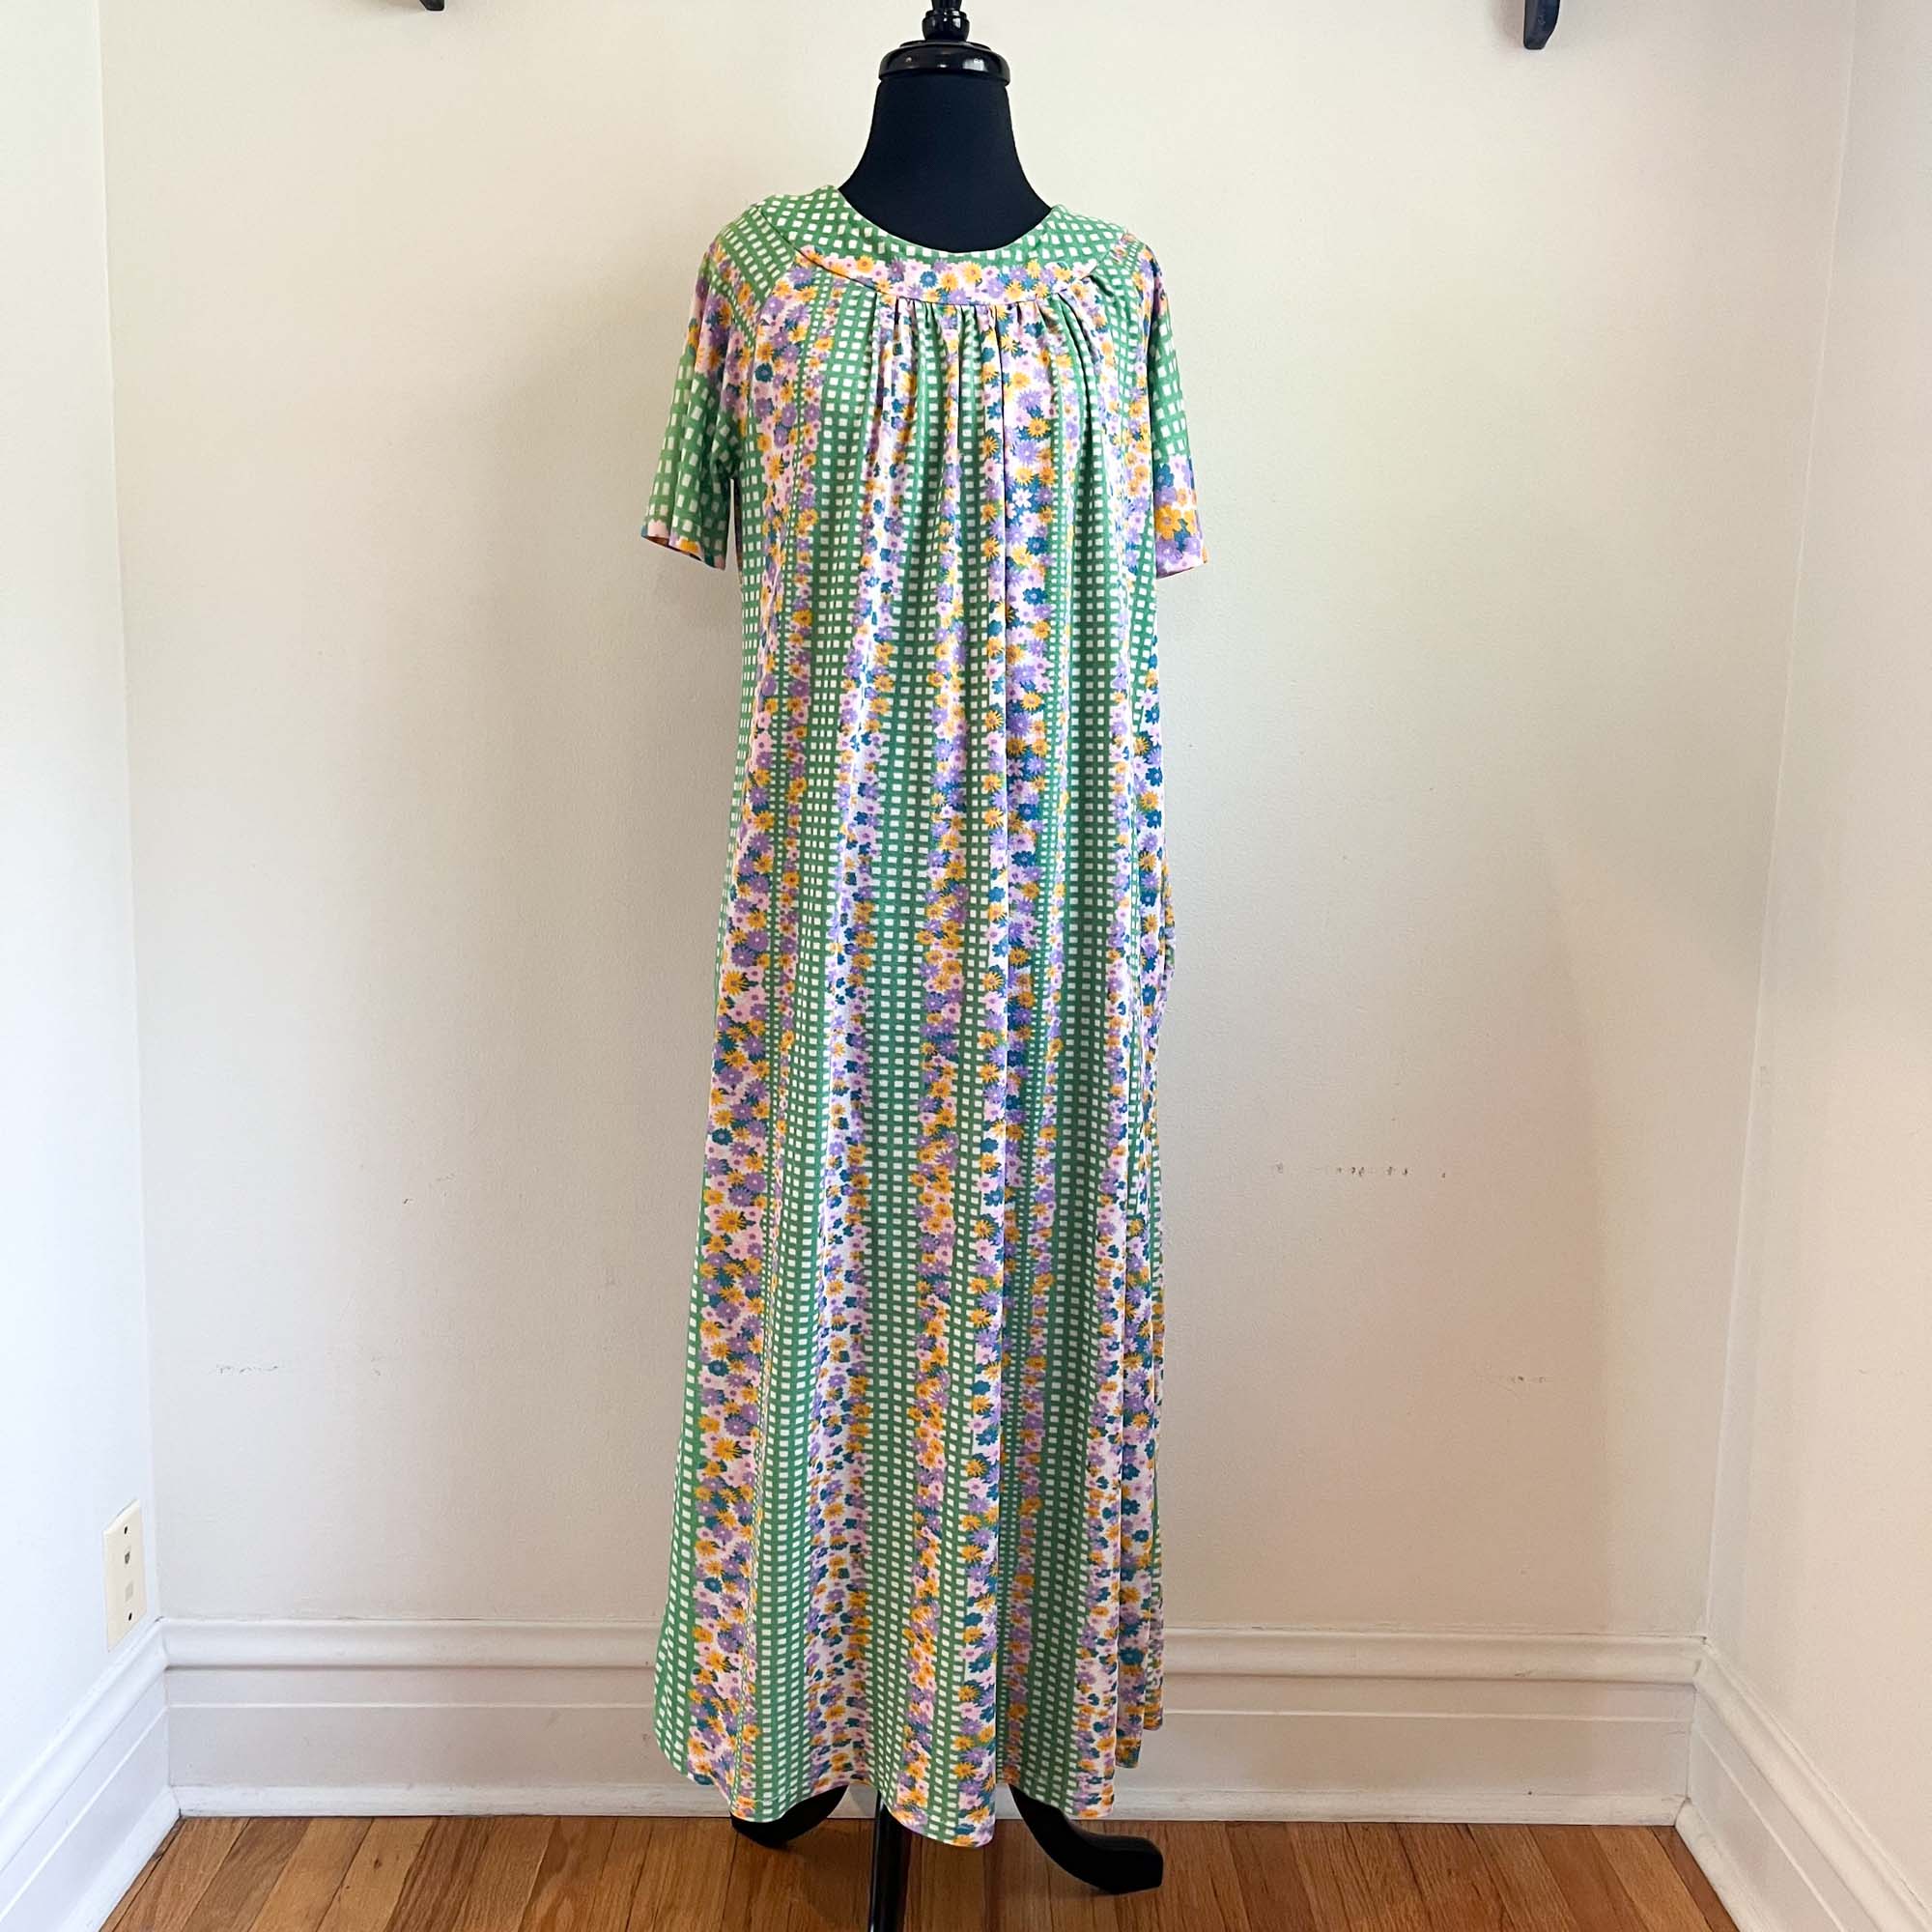 VINTAGE LOUNGE DRESS THE MAY SHOWERS DRESS